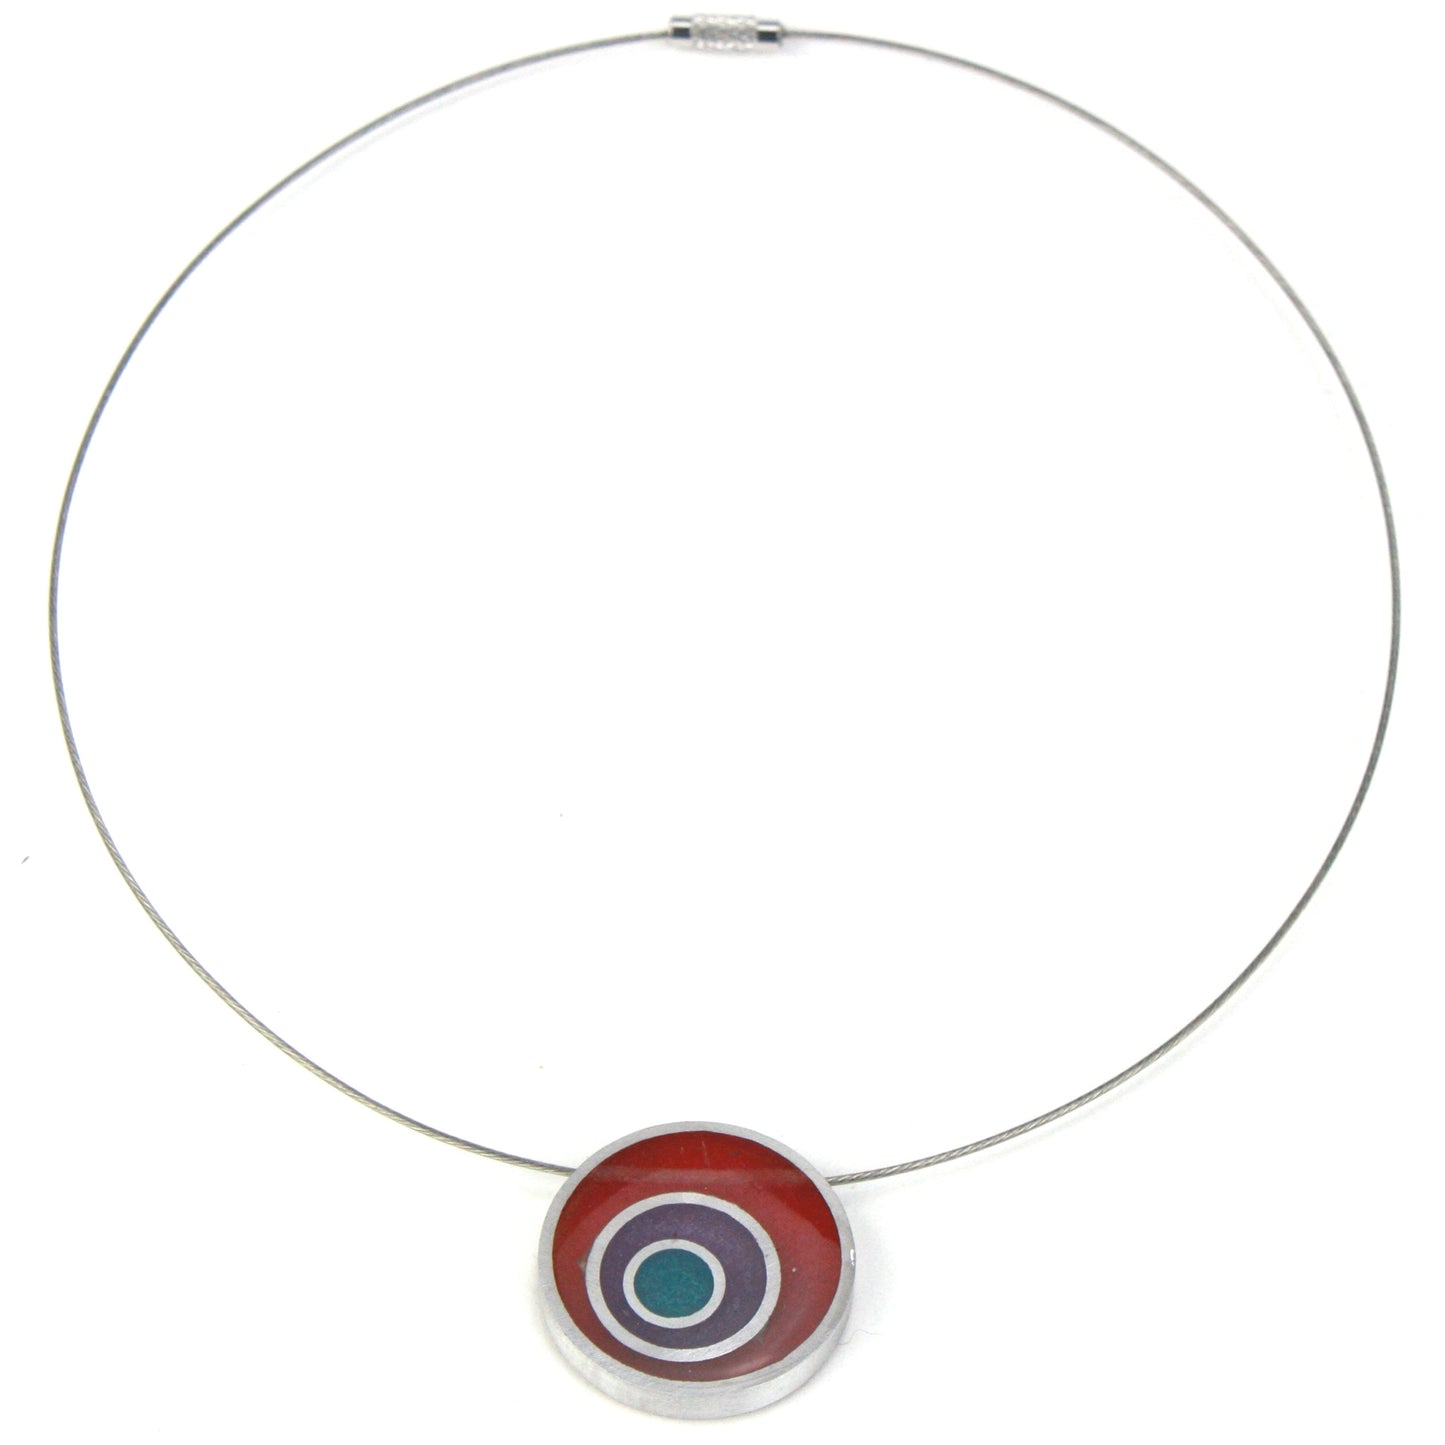 Resinique triple circle necklace - Red, purple and turquoise